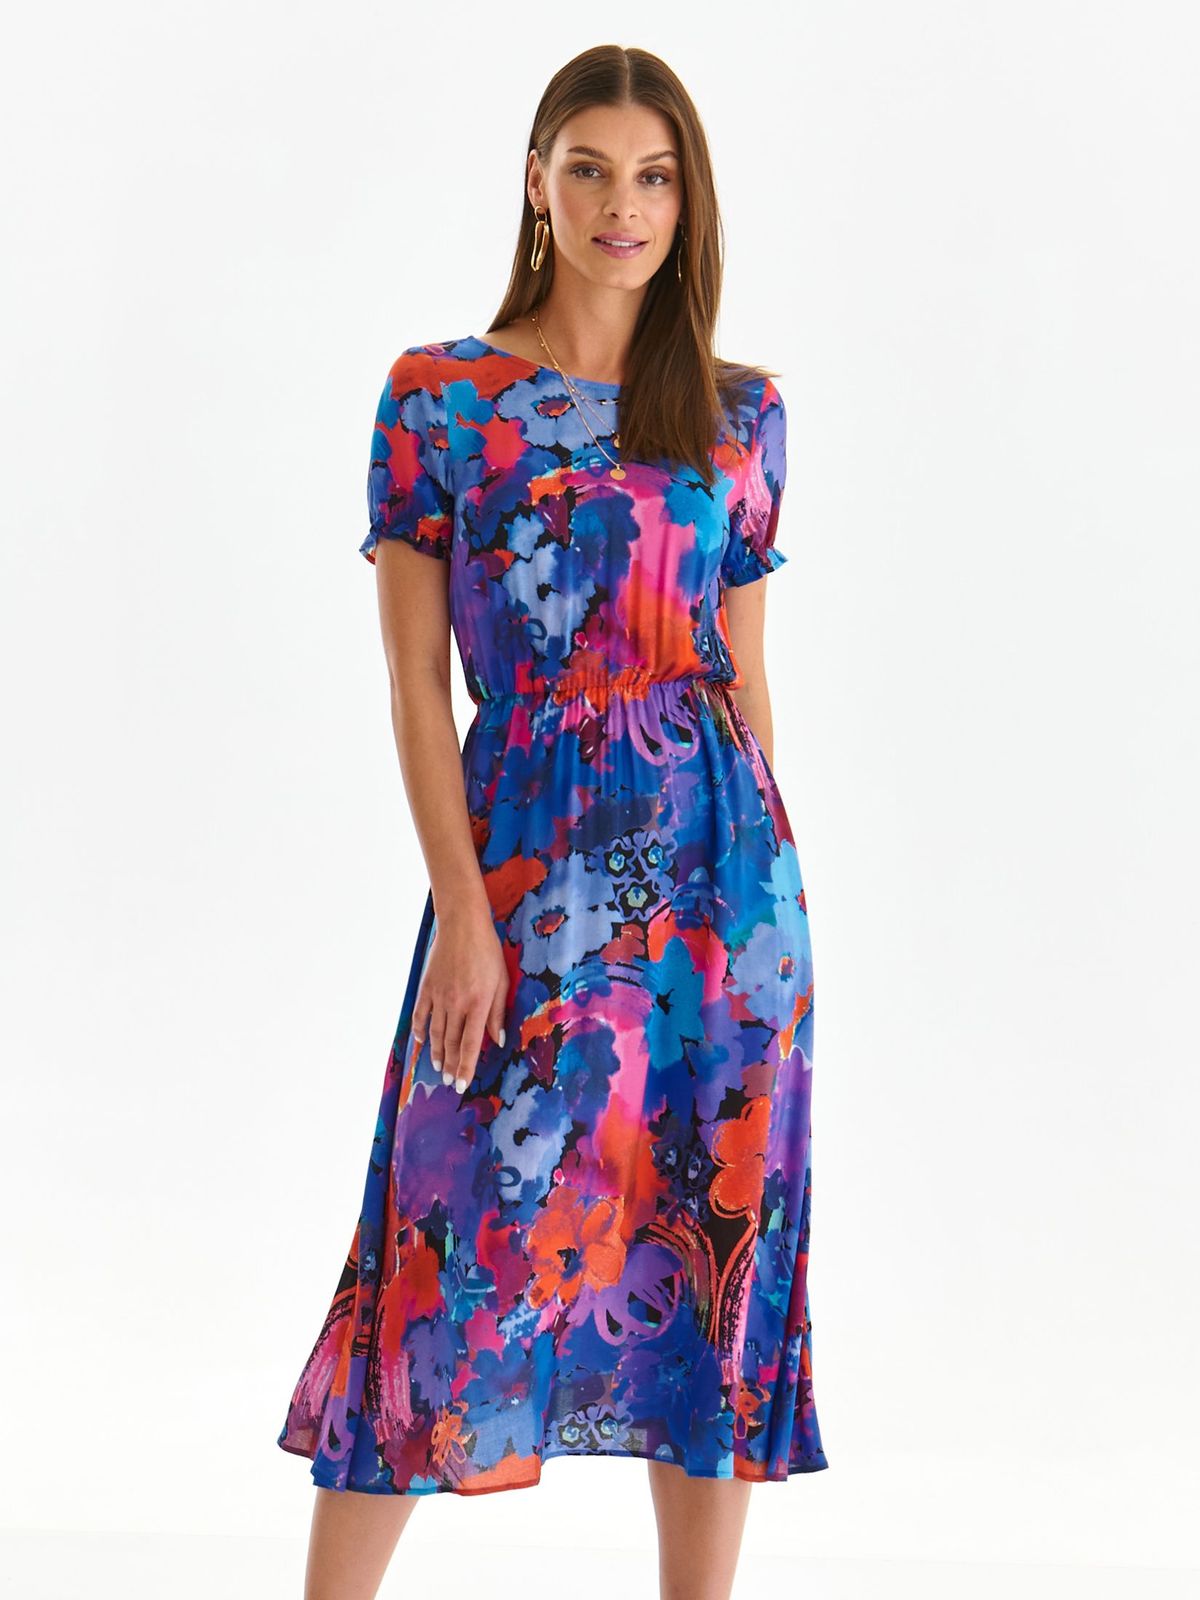 Dress midi cloche with elastic waist thin fabric with floral print